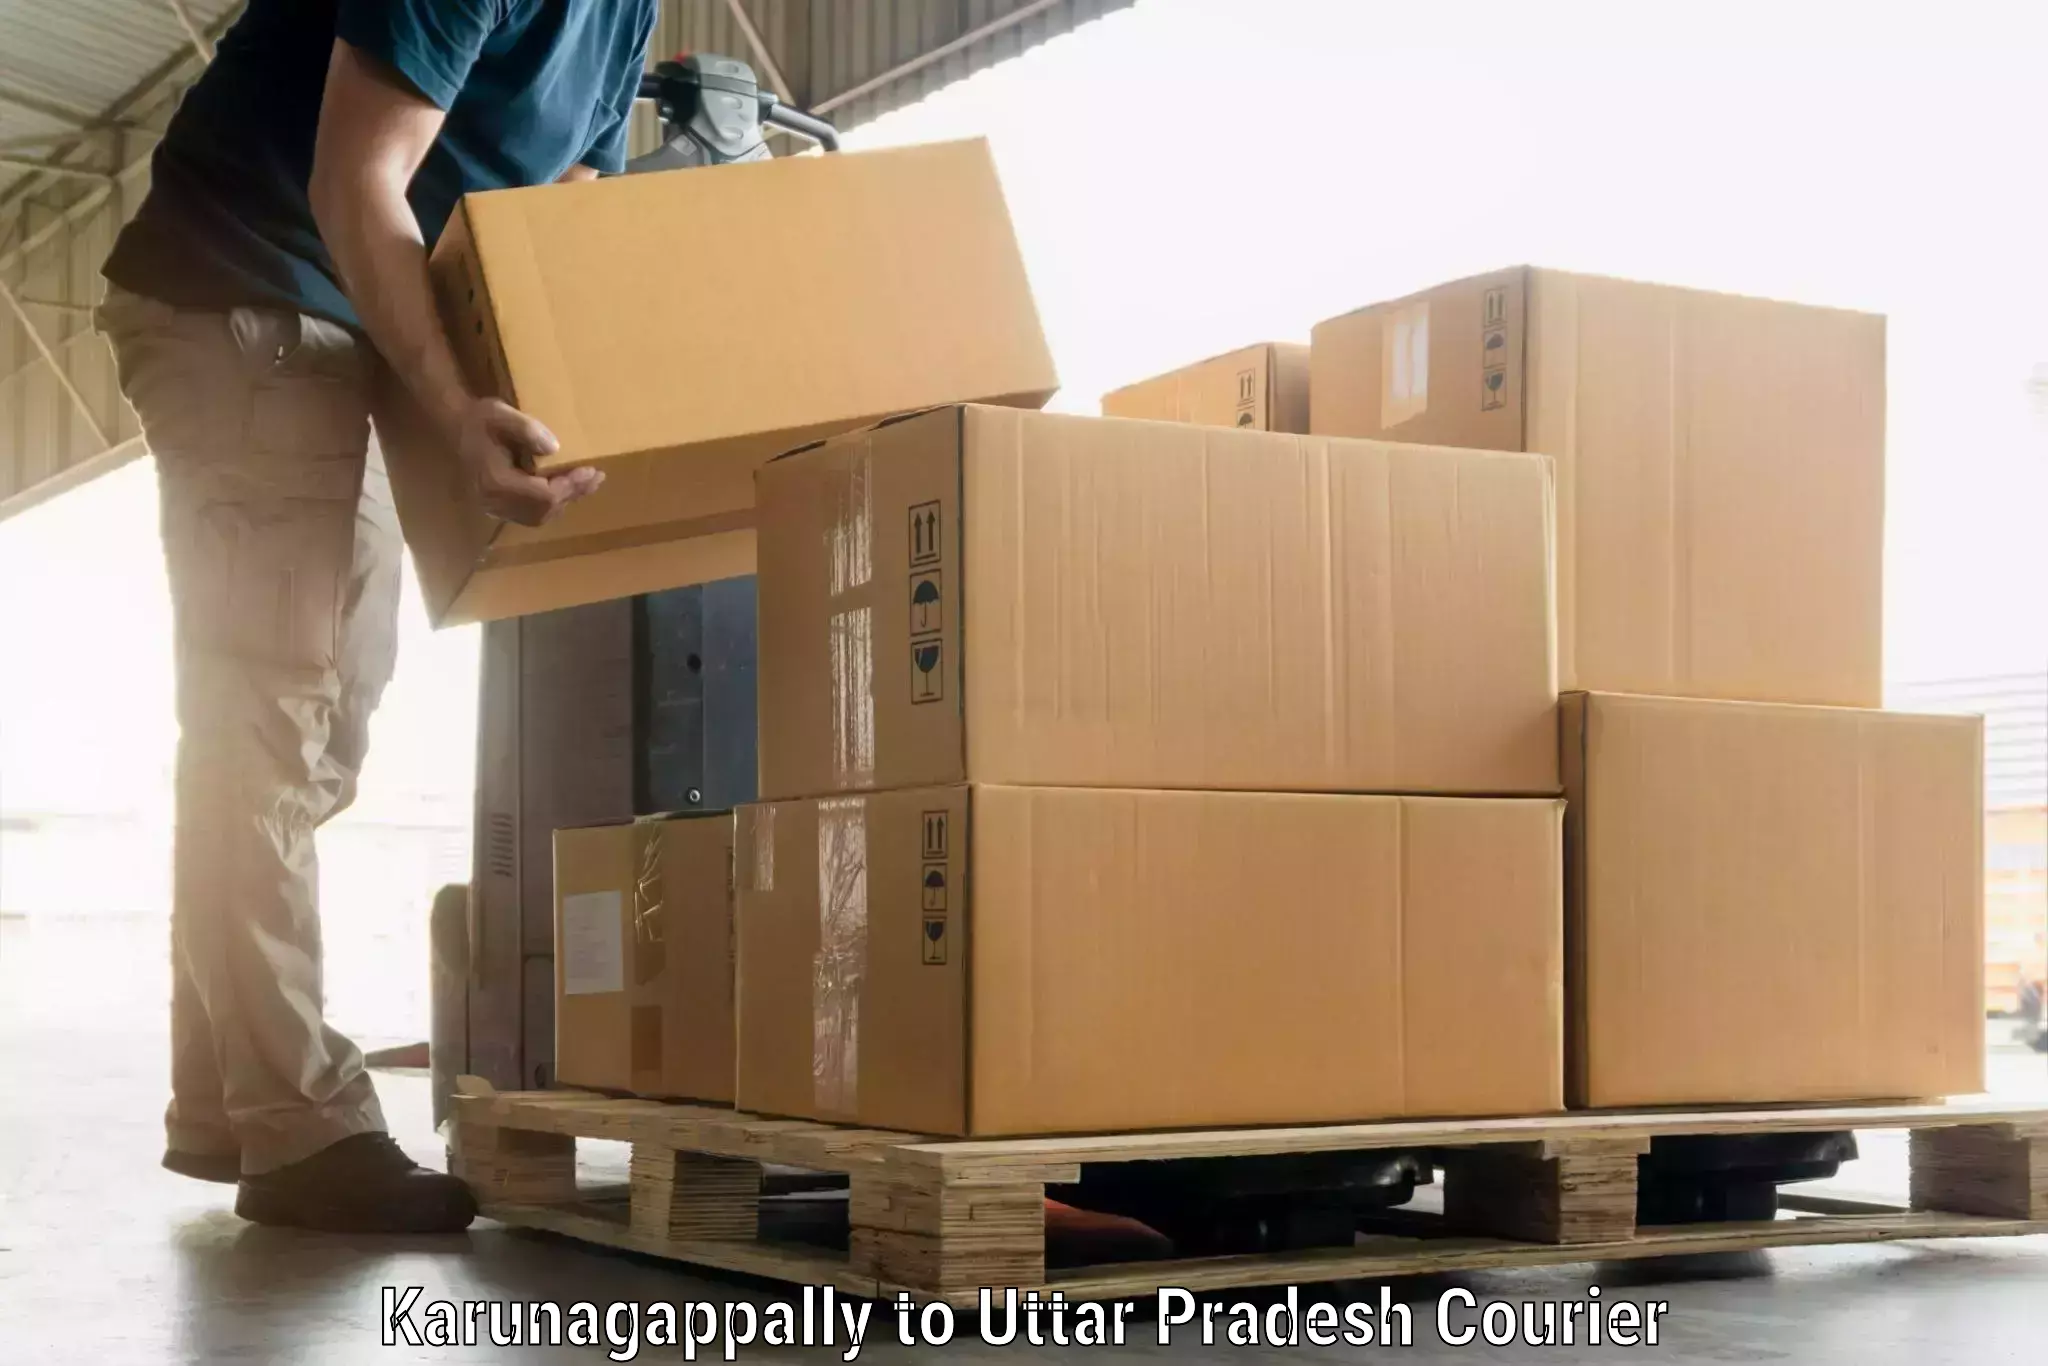 Luggage storage and delivery in Karunagappally to Allahabad